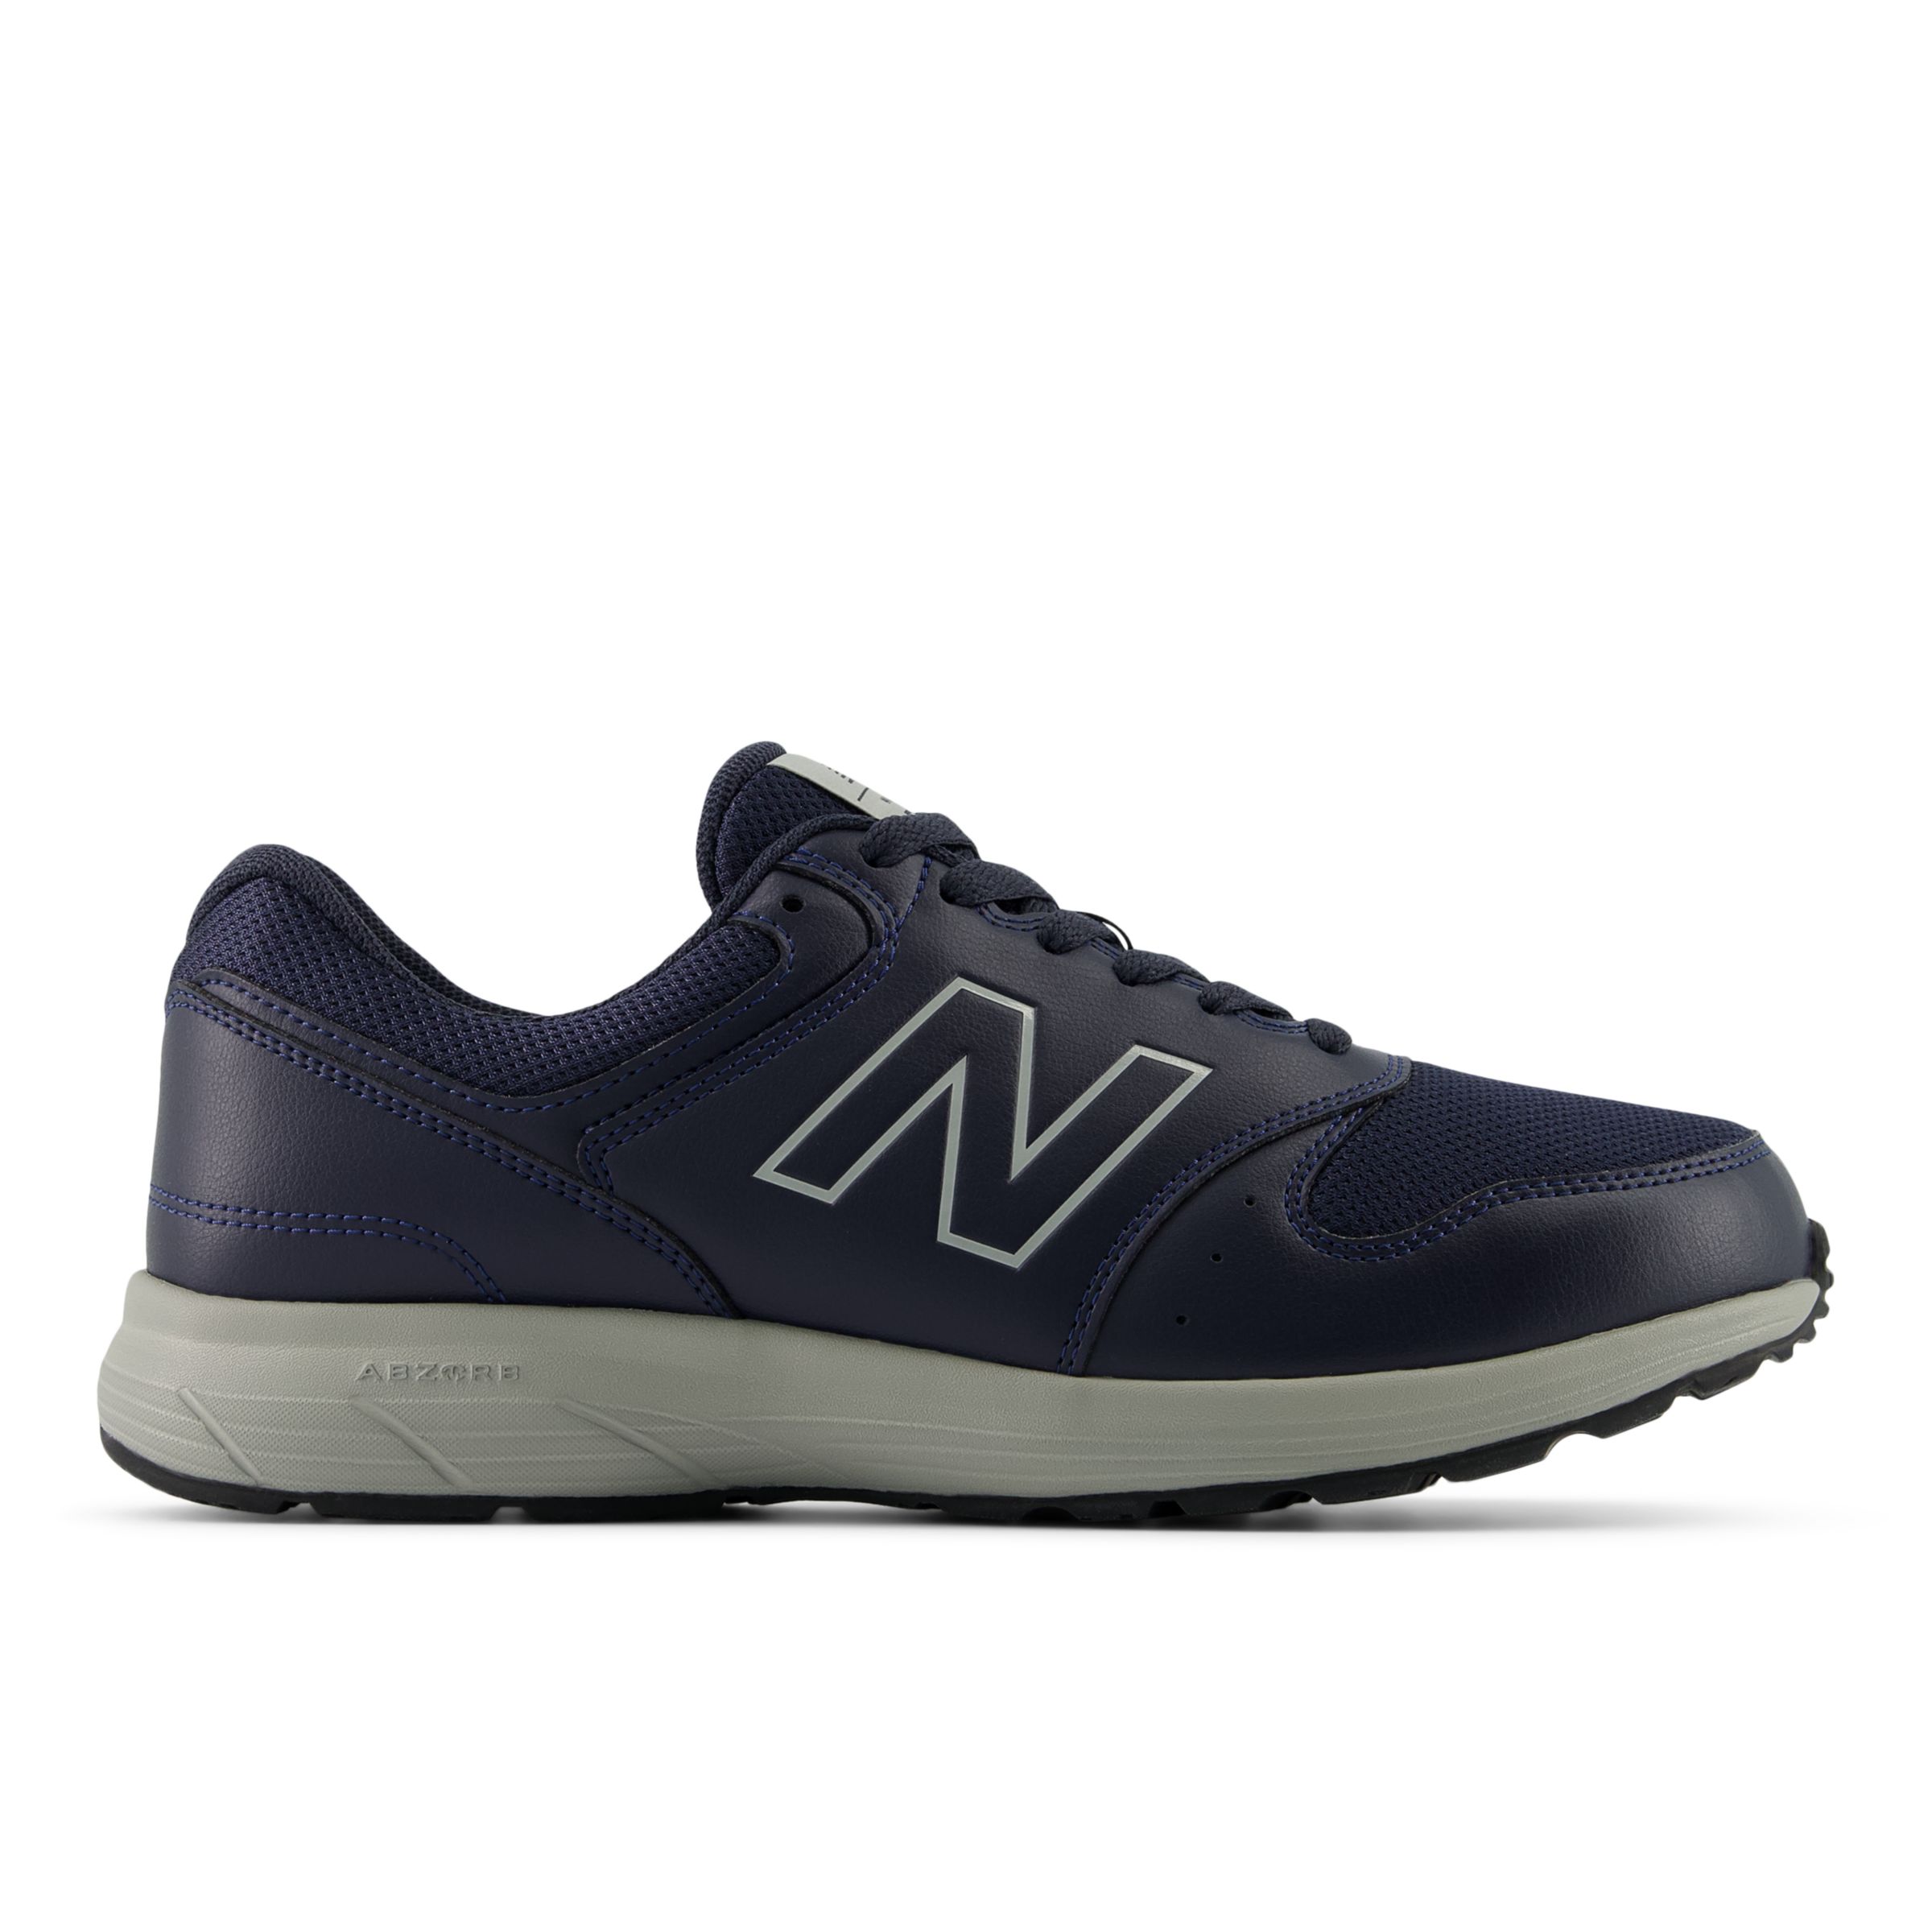 New Balance Homme 550 v4 en Bleu, Synthetic, Taille 40.5 Extra-Extra-Large